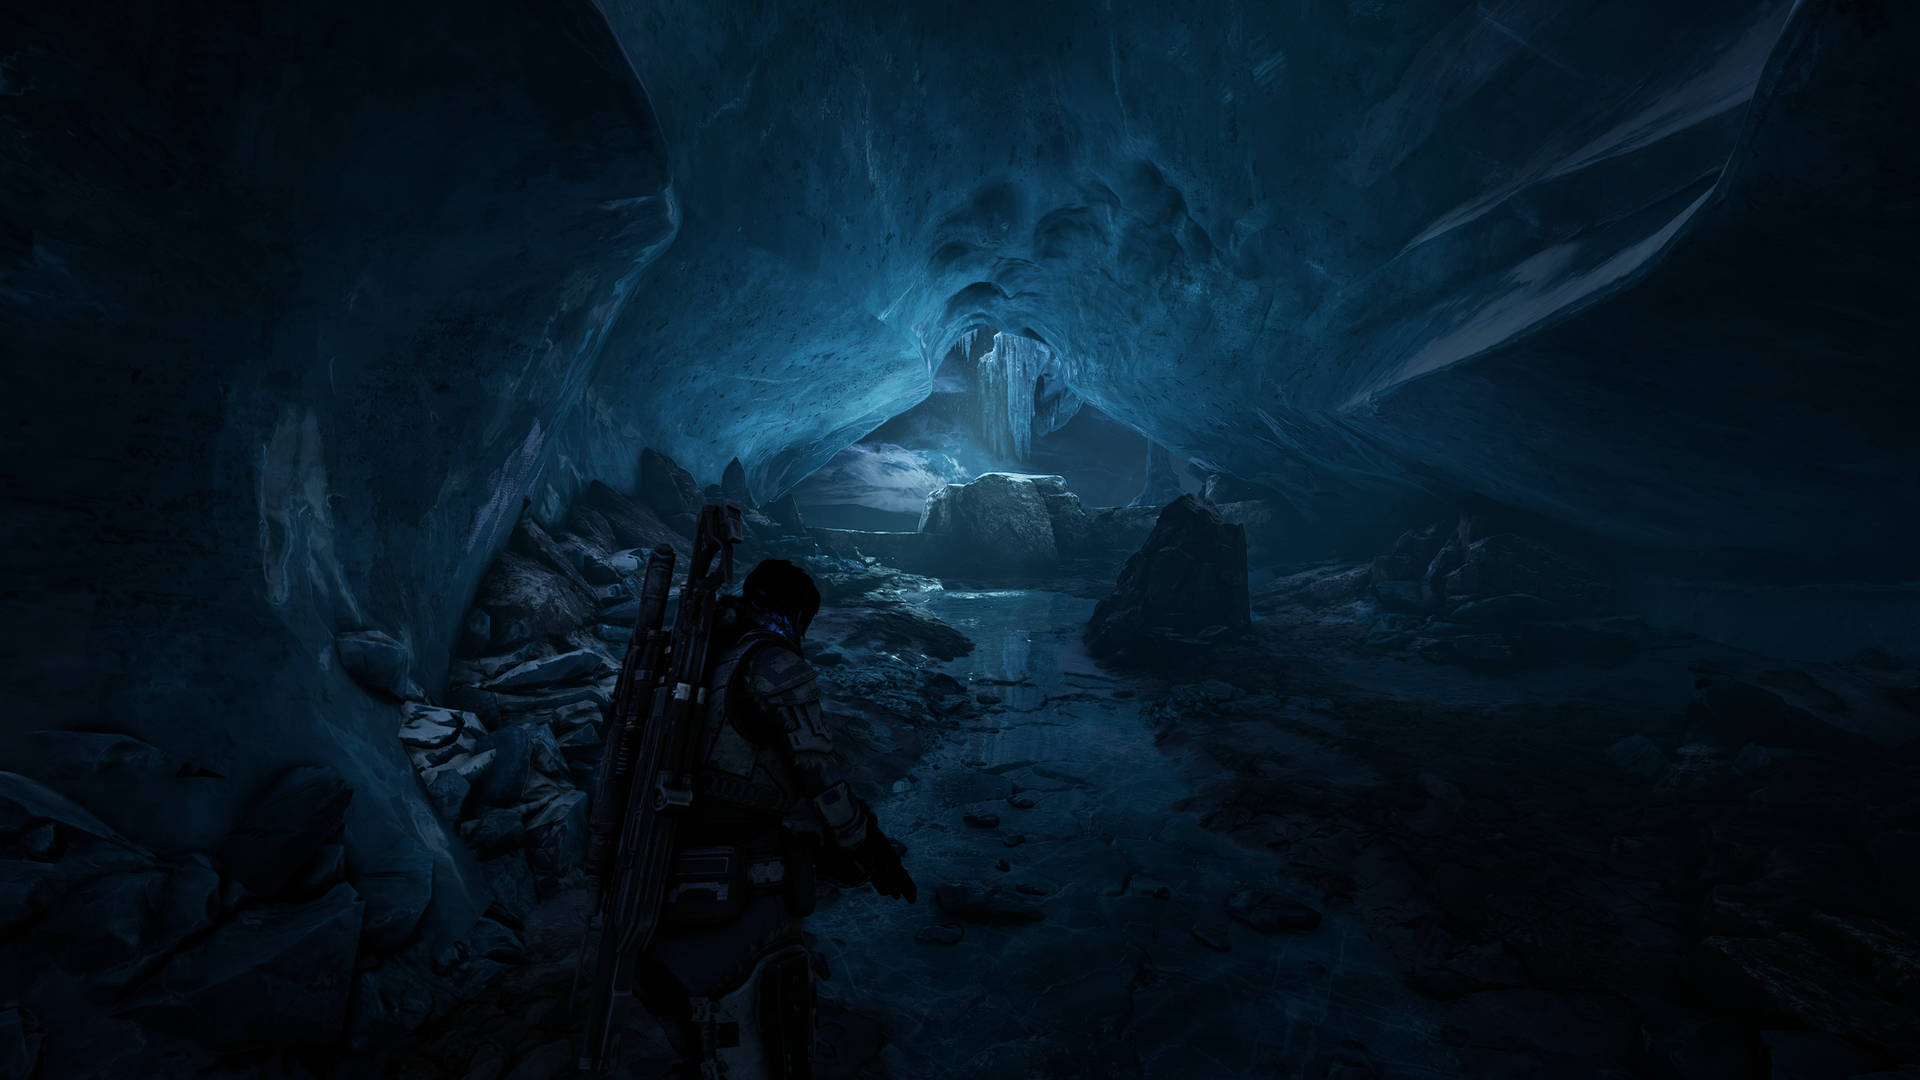 A Man Is Walking Through An Icy Cave Wallpaper